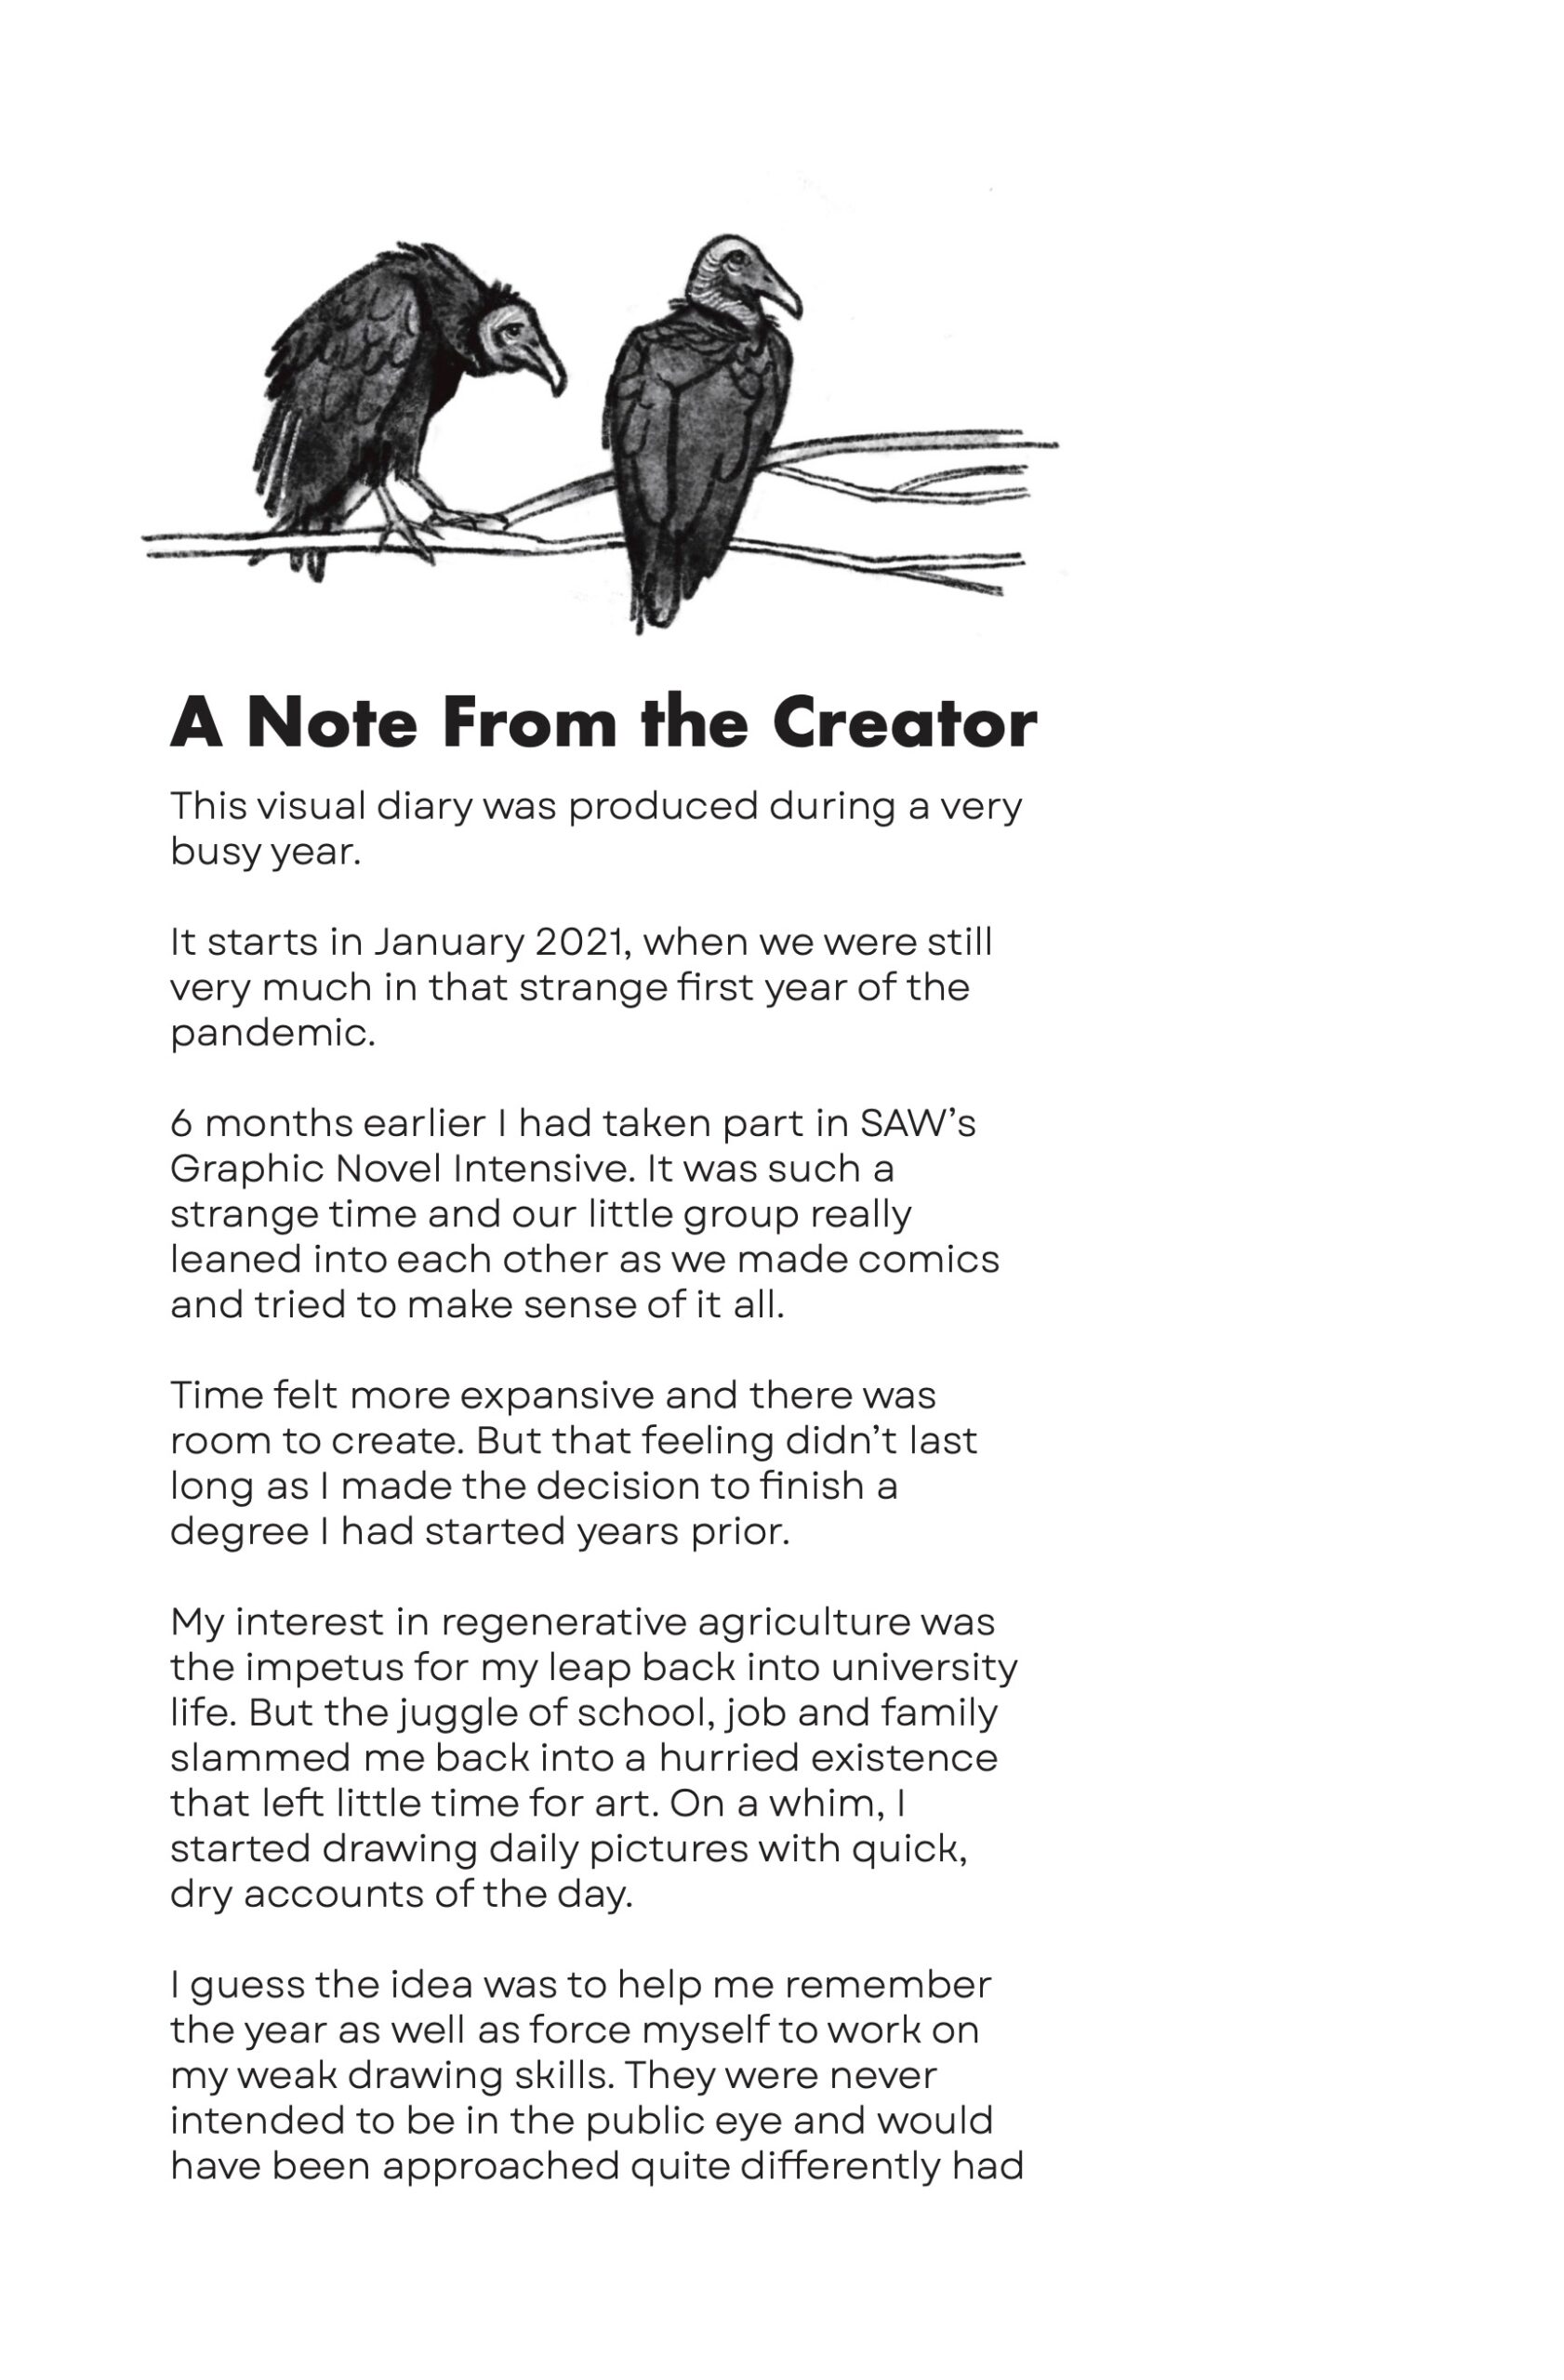 Two vultures are perched atop a branch running horizontally across the page, above the author note:

"A Note From the Creator
This visual diary was produced during a very busy year.

It starts in January 2021, when we were still very much in that strange first year of the pandemic.

6 months earlier I had taken part in SAW’s Graphic Novel Intensive. It was such a strange time and our little group really leaned into each other as we made comics and tried to make sense of it all.

Time felt more expansive and there was room to create. But that feeling didn’t last long as I made the decision to finish a degree I had started years prior.

My interest in regenerative agriculture was the impetus for my leap back into university life. But the juggle of school, job and family slammed me back into a hurried existence that left little time for art. On a whim, I started drawing daily pictures with quick, dry accounts of the day. I guess the idea was to help me remember the year as well as force myself to work on my weak drawing skills. They were never intended to be in the public eye and would have been approached quite differently had…"